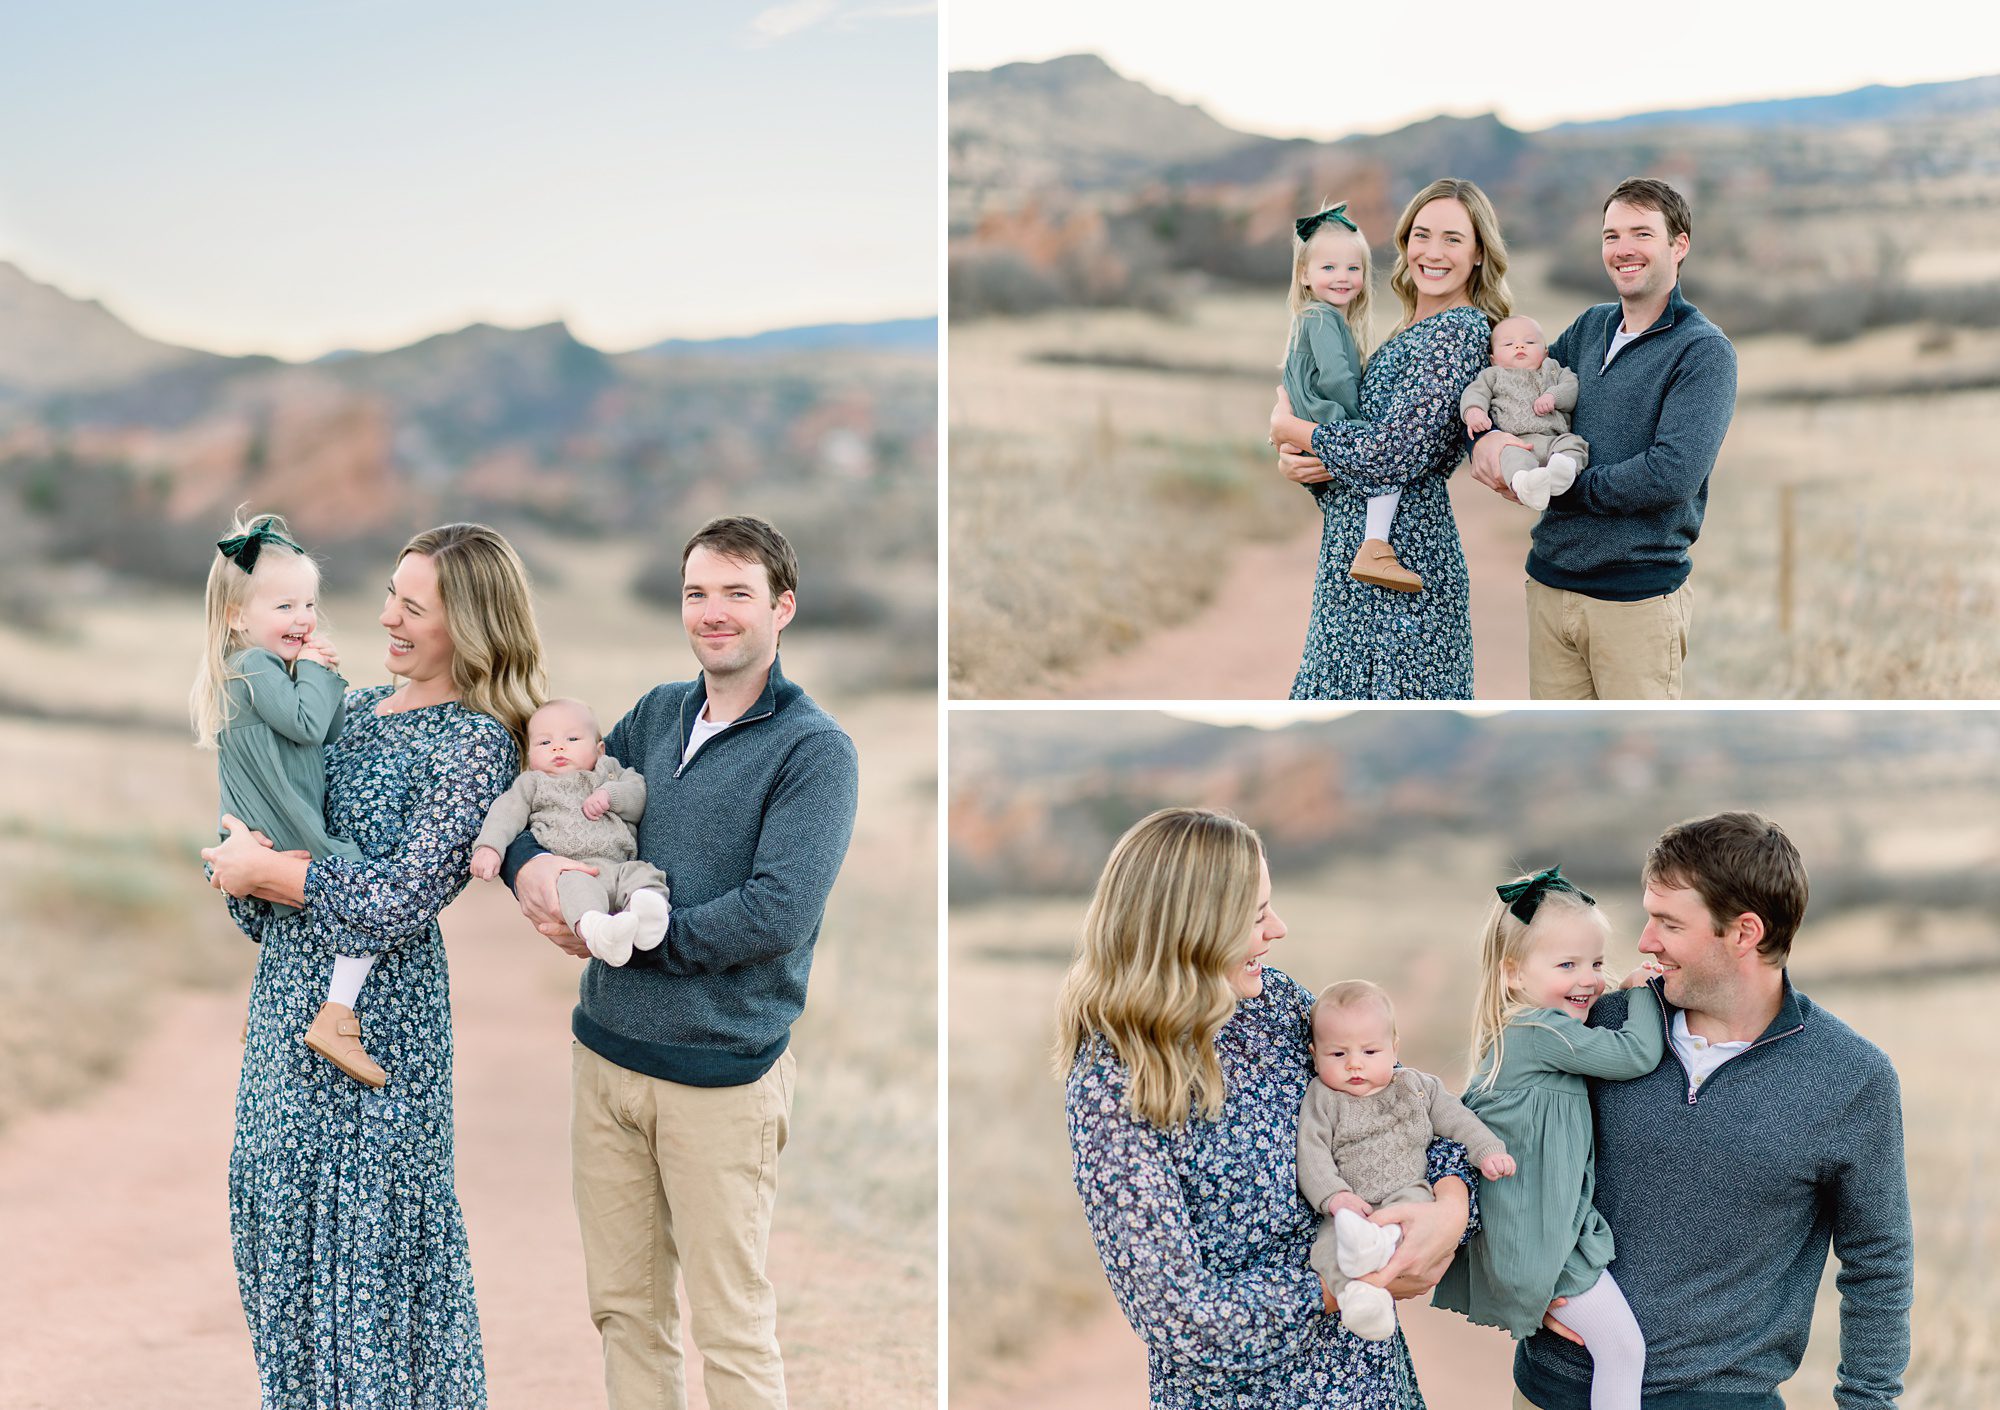 A sweet family of 4 with small children get family photos taken in Ken Caryl, CO with a beautiful mountain backdrop.